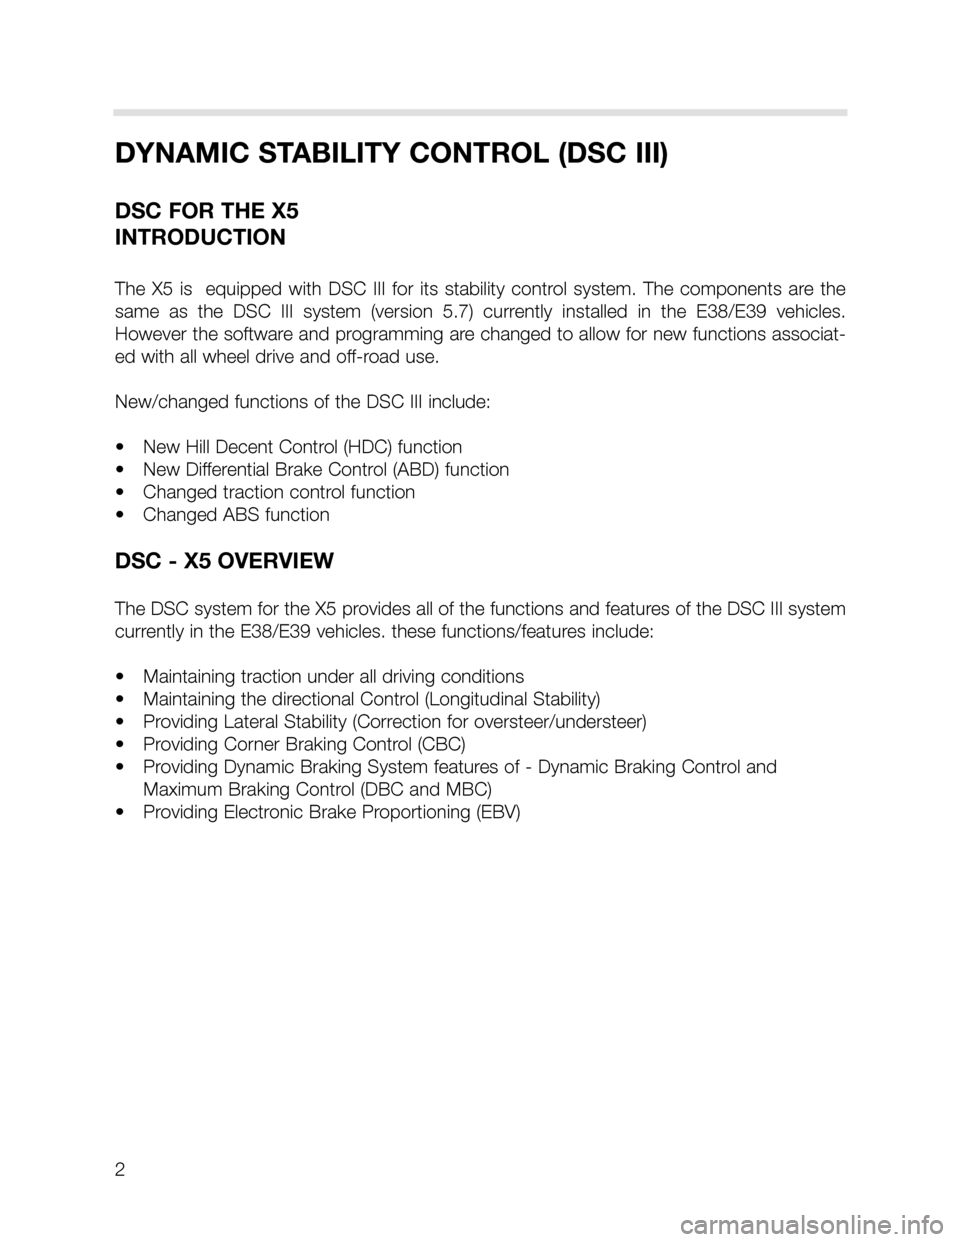 BMW X5 2002 E53 DSC System Workshop Manual 2
DYNAMIC STABILITY CONTROL (DSC III)
DSC FOR THE X5
INTRODUCTION
The  X5  is    equipped  with  DSC  III  for  its  stability  control  system.  The  components  are  the
same  as  the  DSC  III  sys